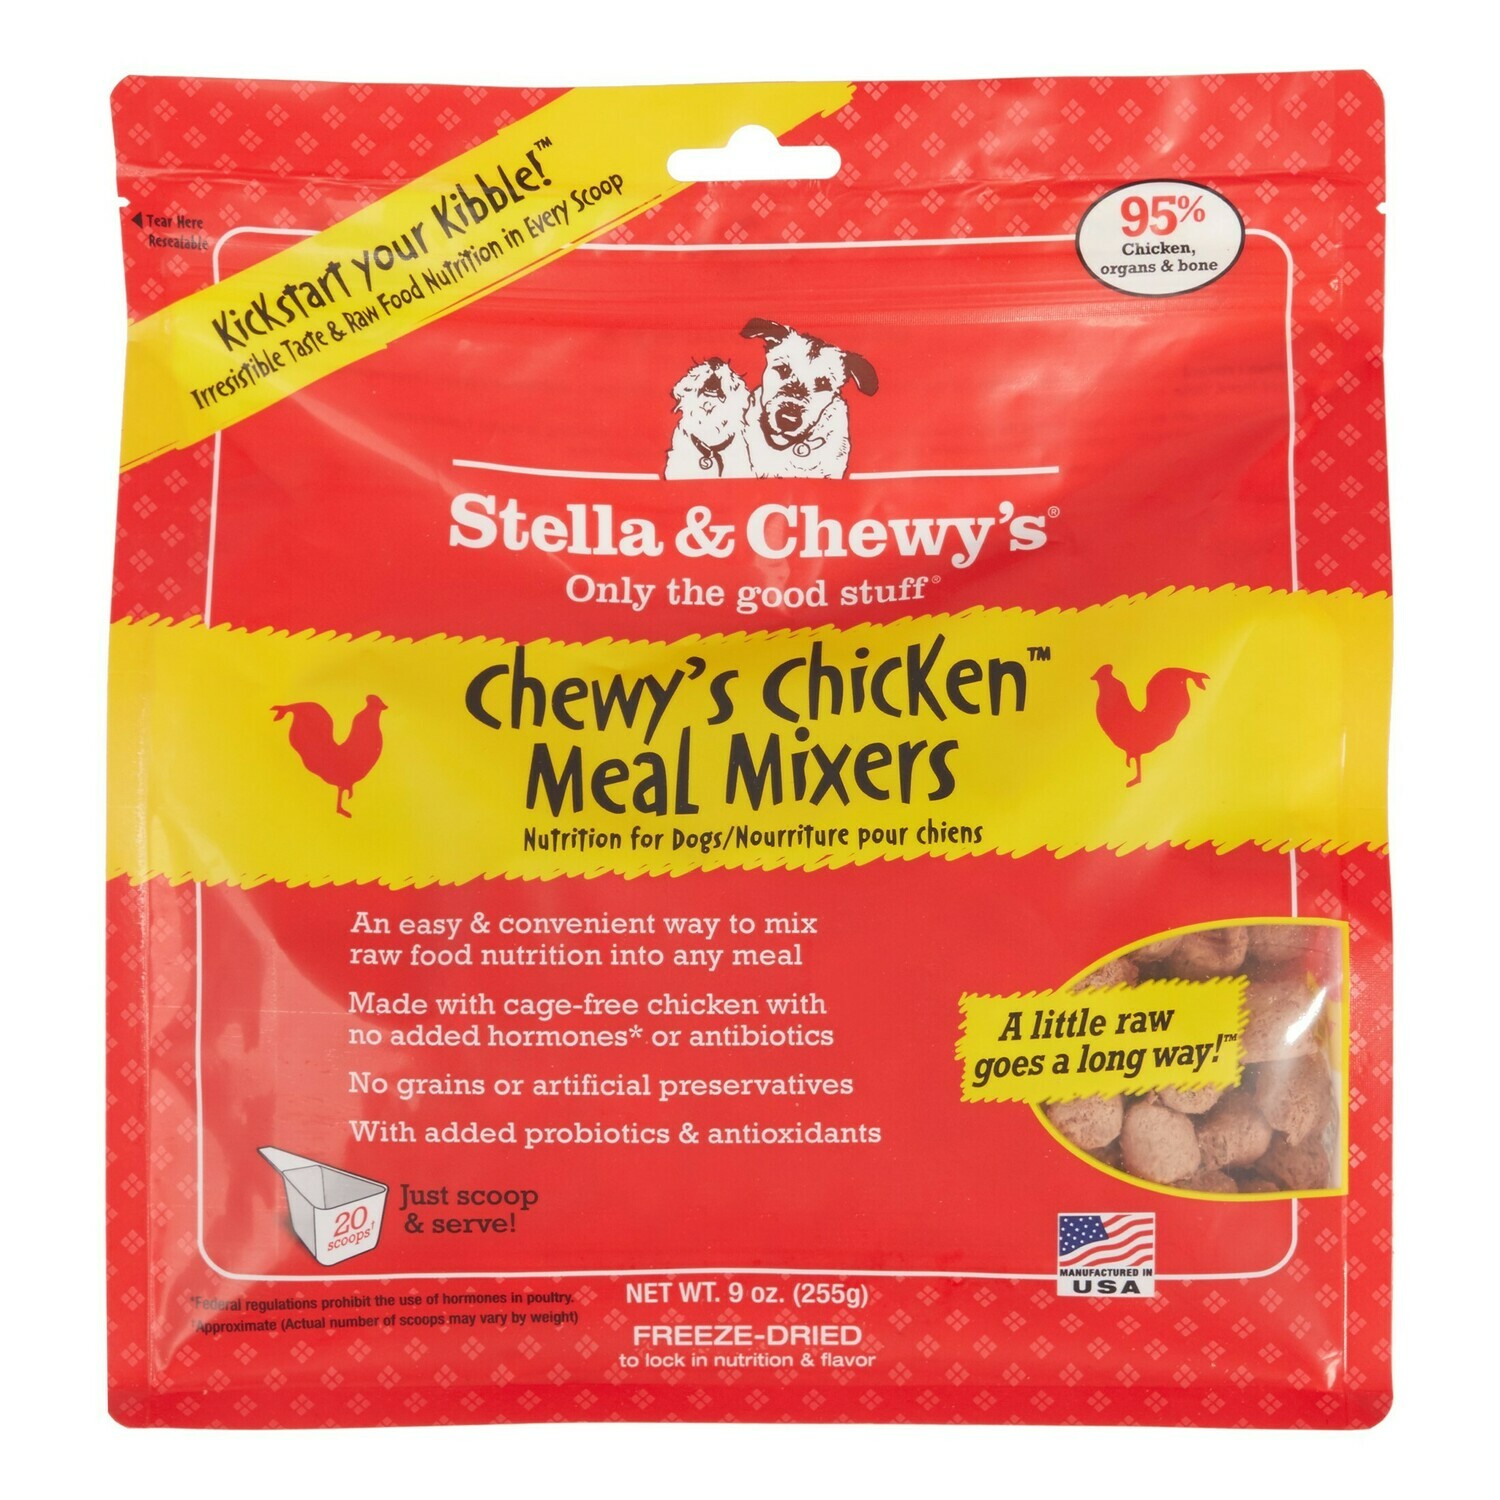 Stella & Chewy's Chewy's Chicken Meal Mixers Grain-Free Freeze-Dried Dog Food, 8-oz bag